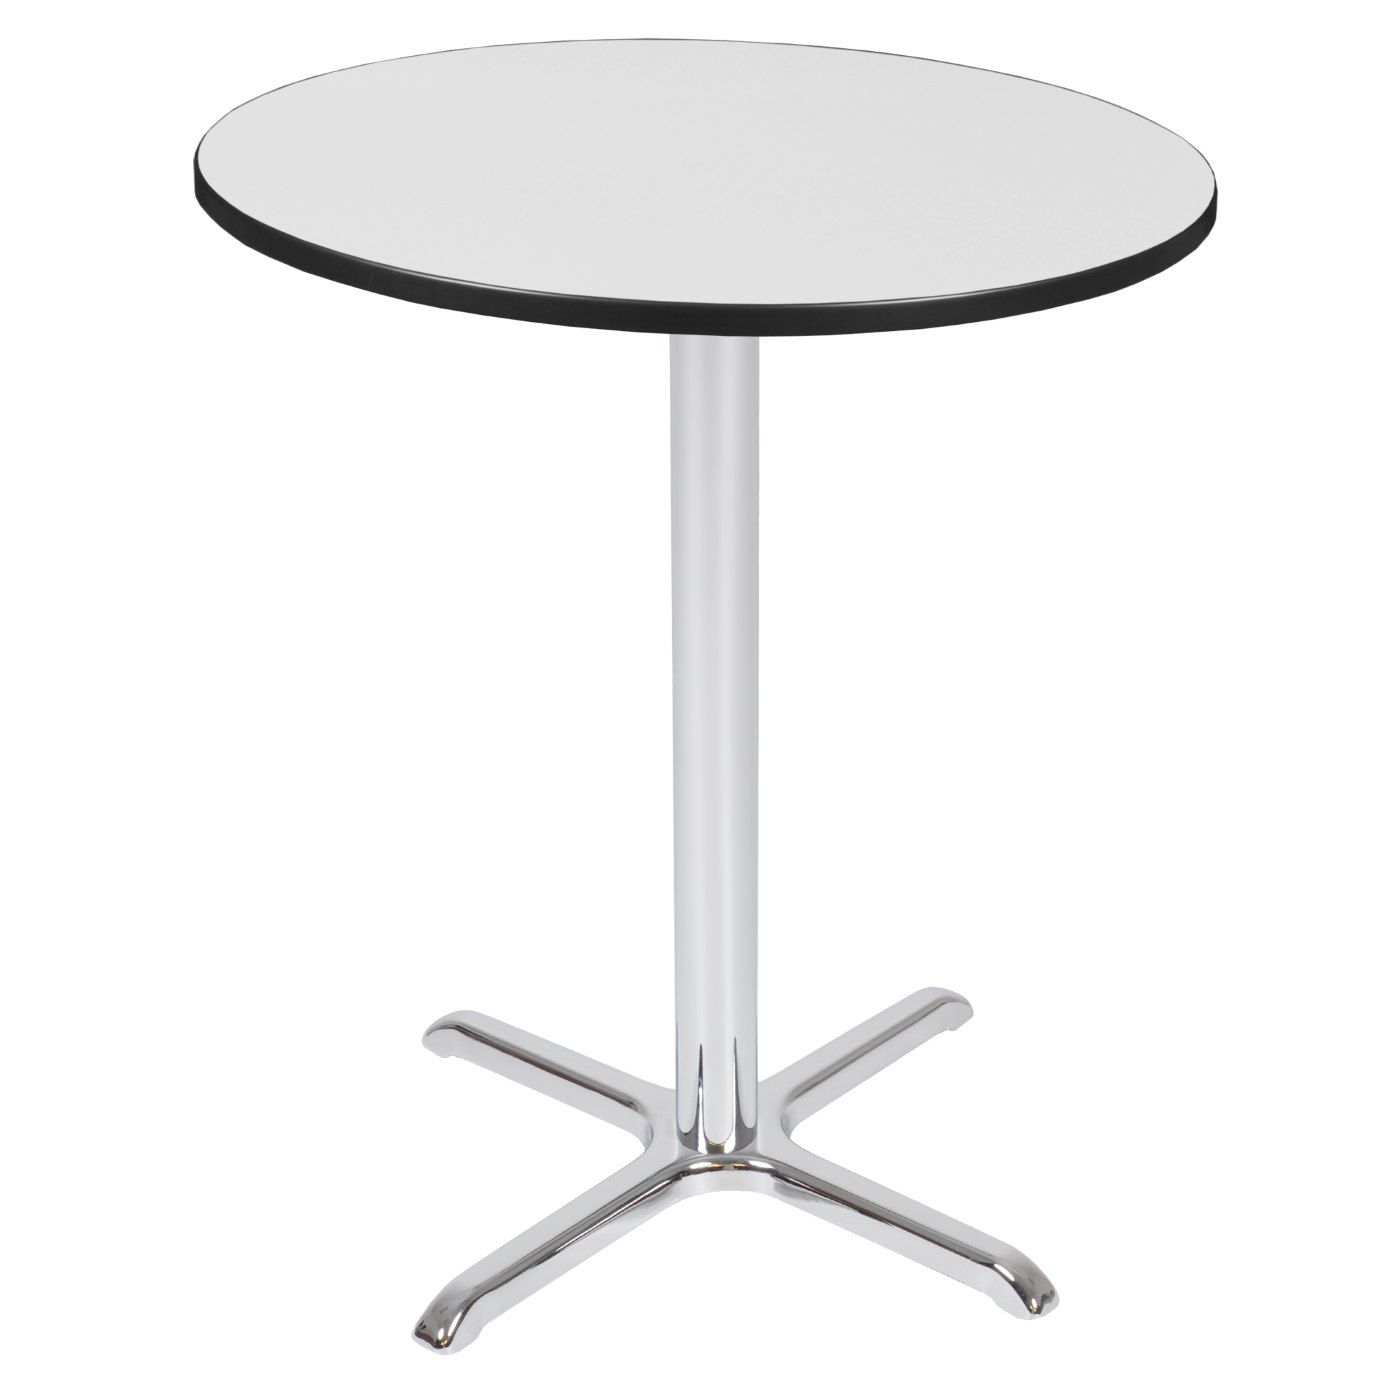 Tcb36rndwhcm | Regency Cain Cafe High 36" Round X Base Table  White Pertaining To Regency Cain Steel Coffee Tables (View 3 of 21)